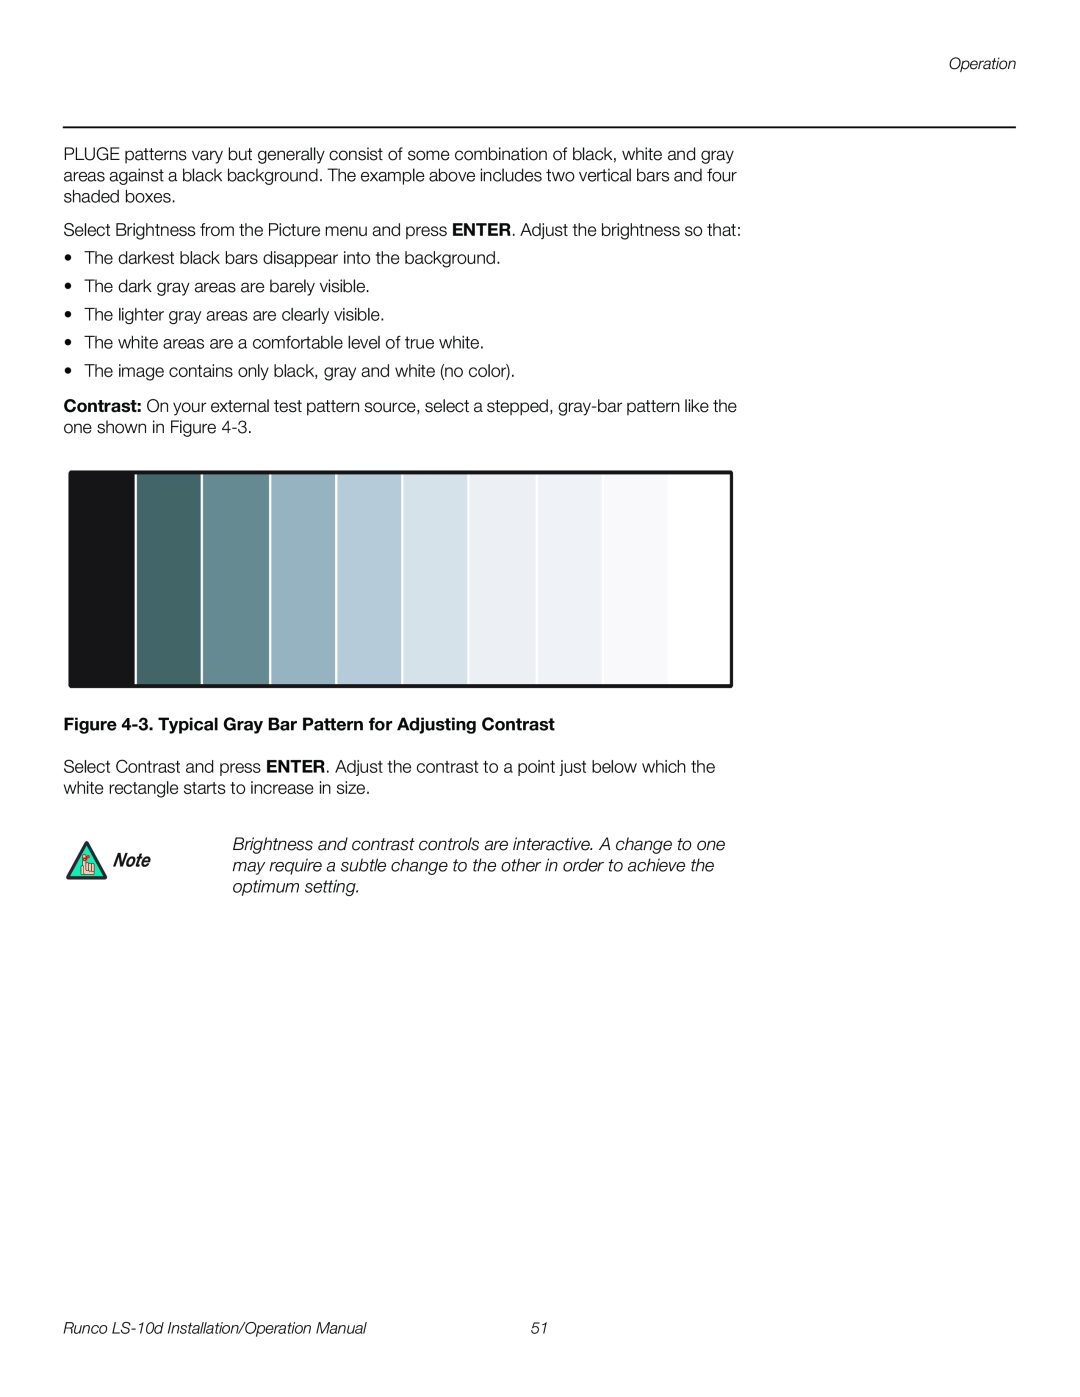 Runco LS-10D operation manual 3. Typical Gray Bar Pattern for Adjusting Contrast 